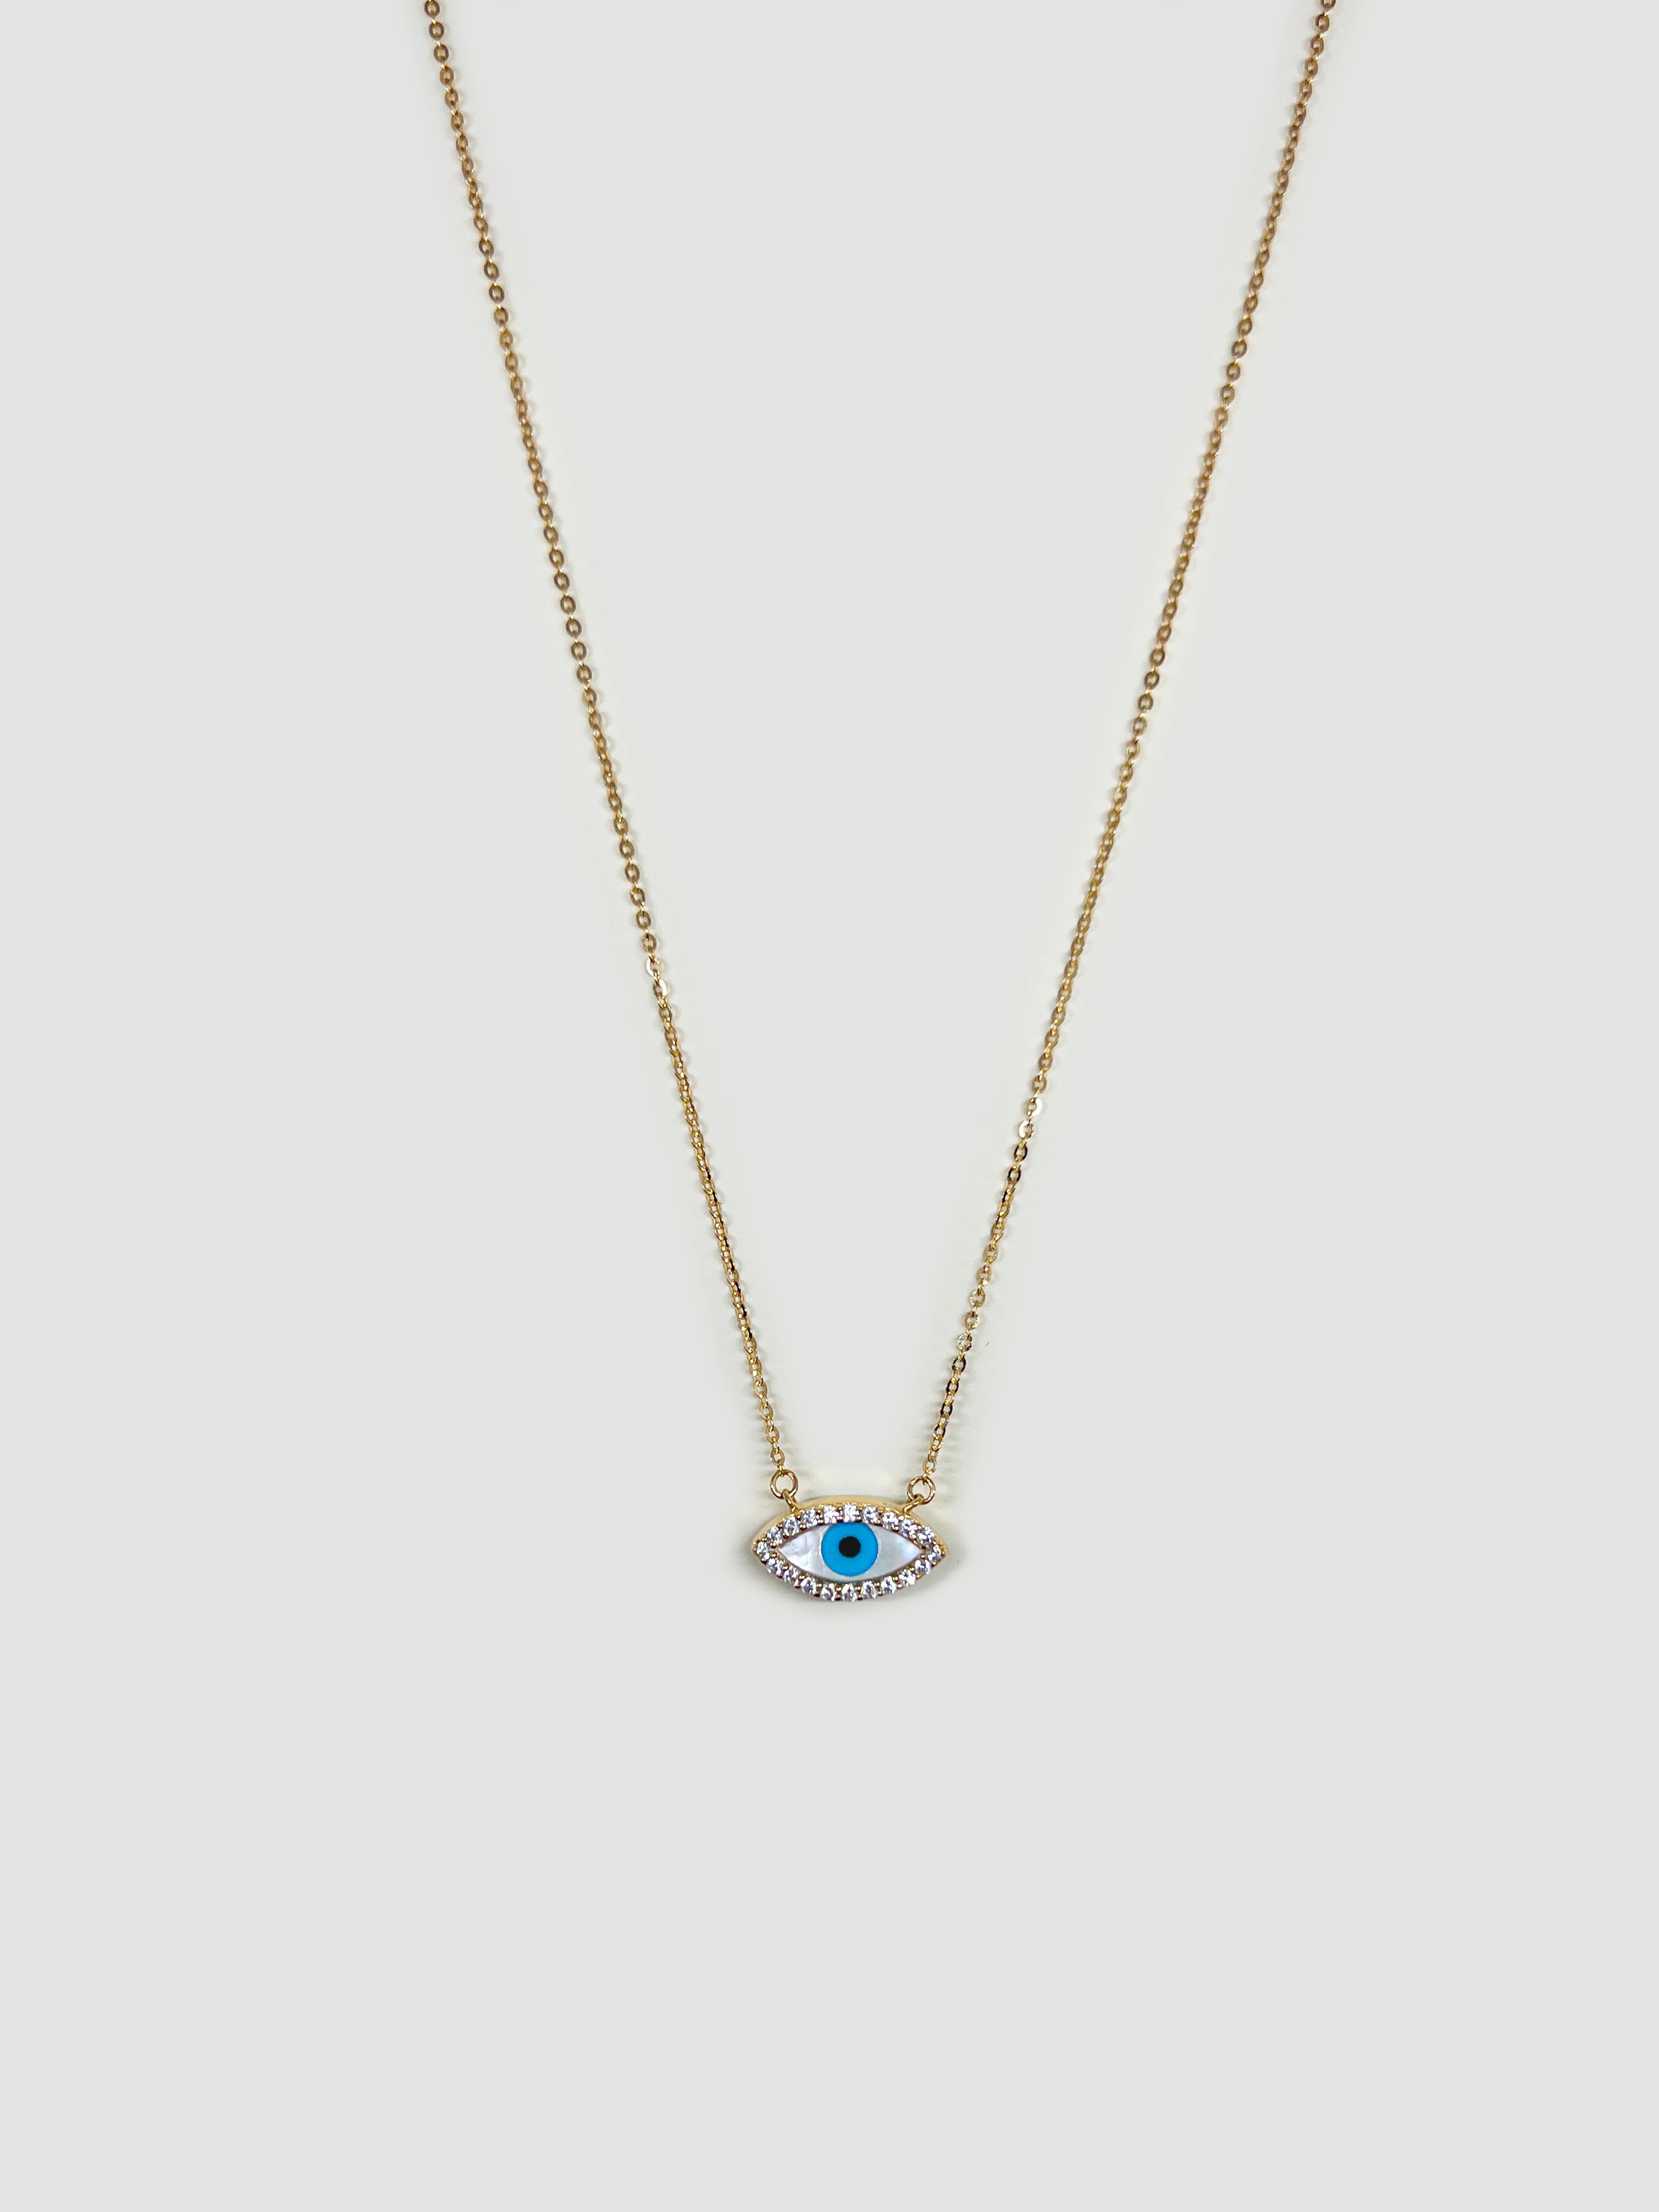 Silver Evil Eye Pendant Necklace | Classy Women Collection